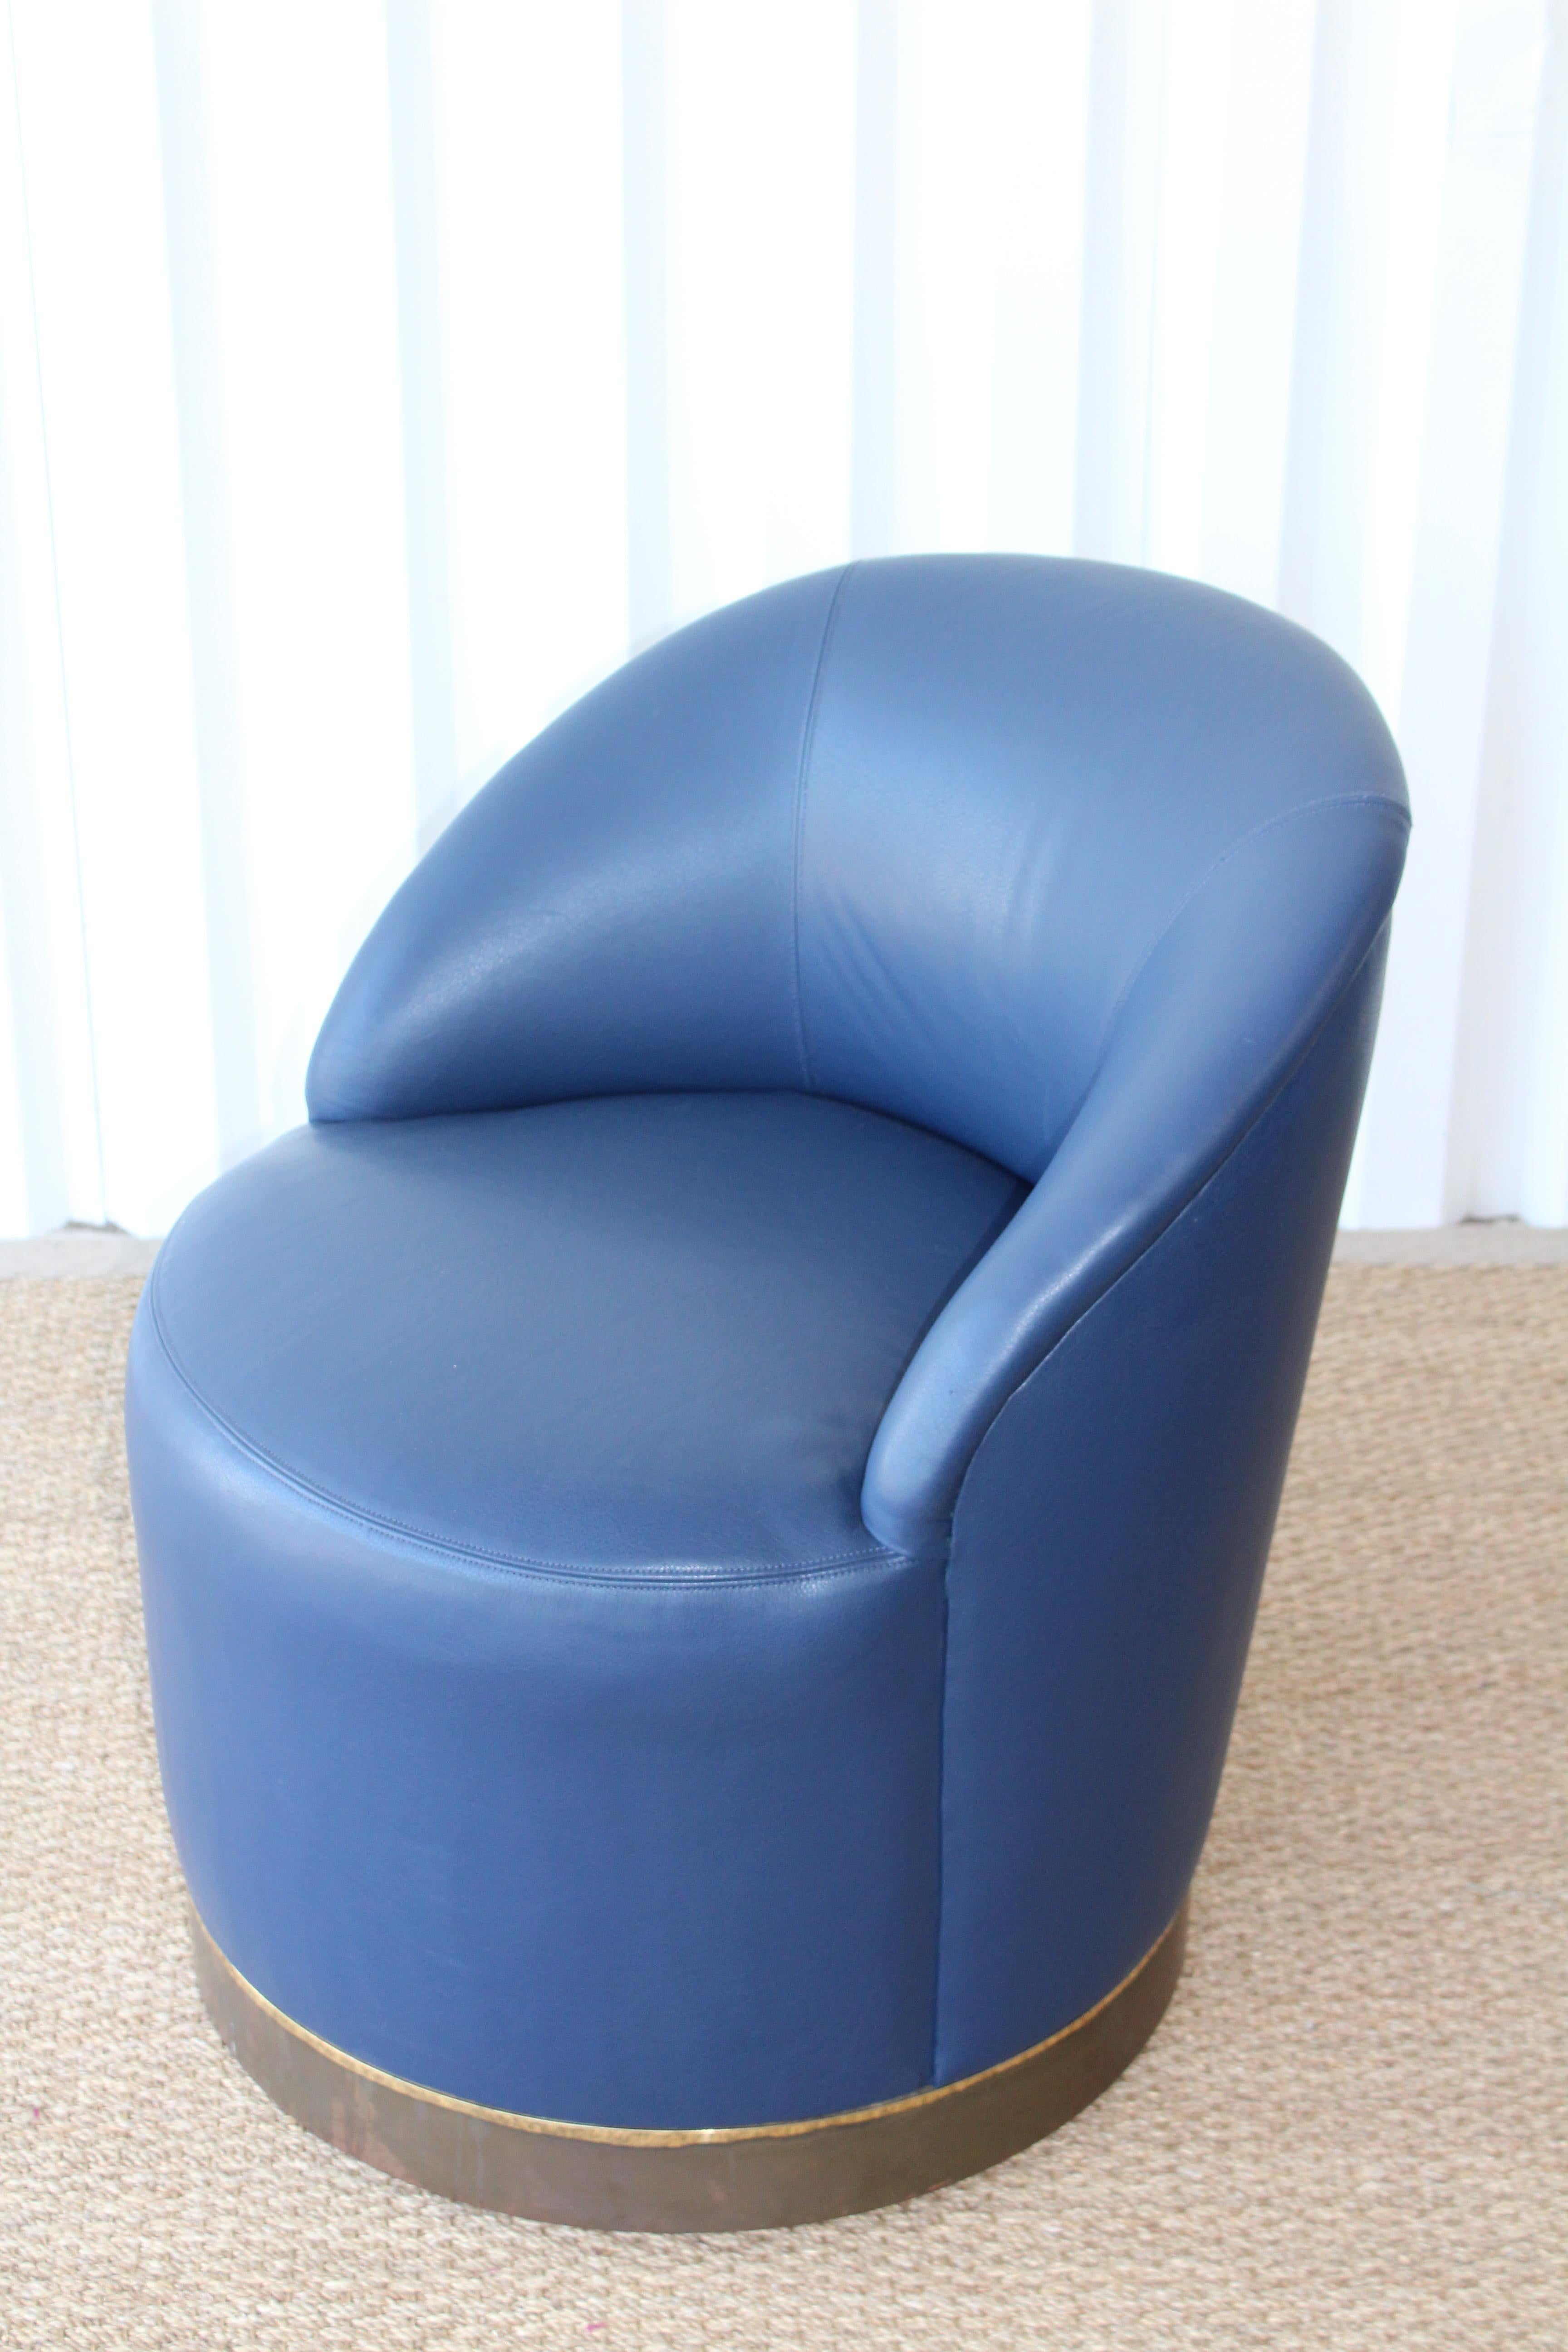 Vintage 1970s swivel chairs designed by Karl Springer. Each chair has been reupholstered in a beautiful navy blue leather. Each chair has a brass trim which shows age appropriate patina. Price is per chair. Three available, sold individually.